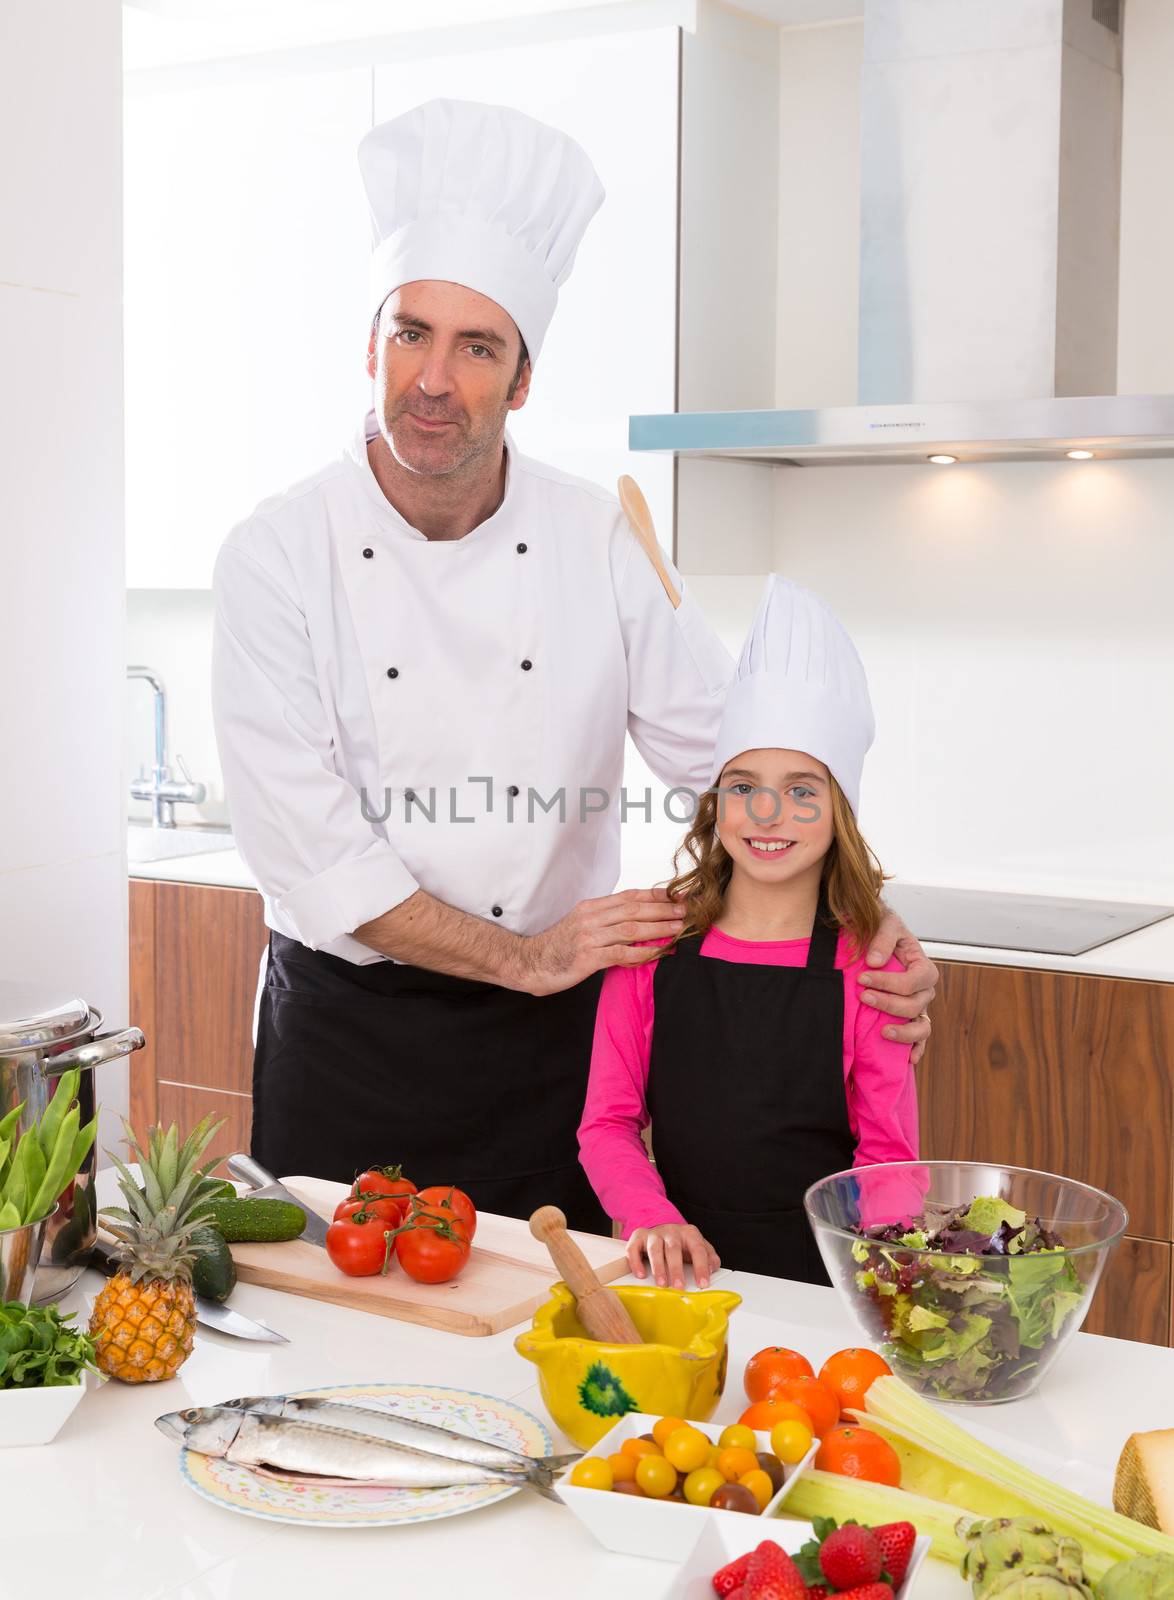 Chef master and junior pupil kid girl at cooking school by lunamarina